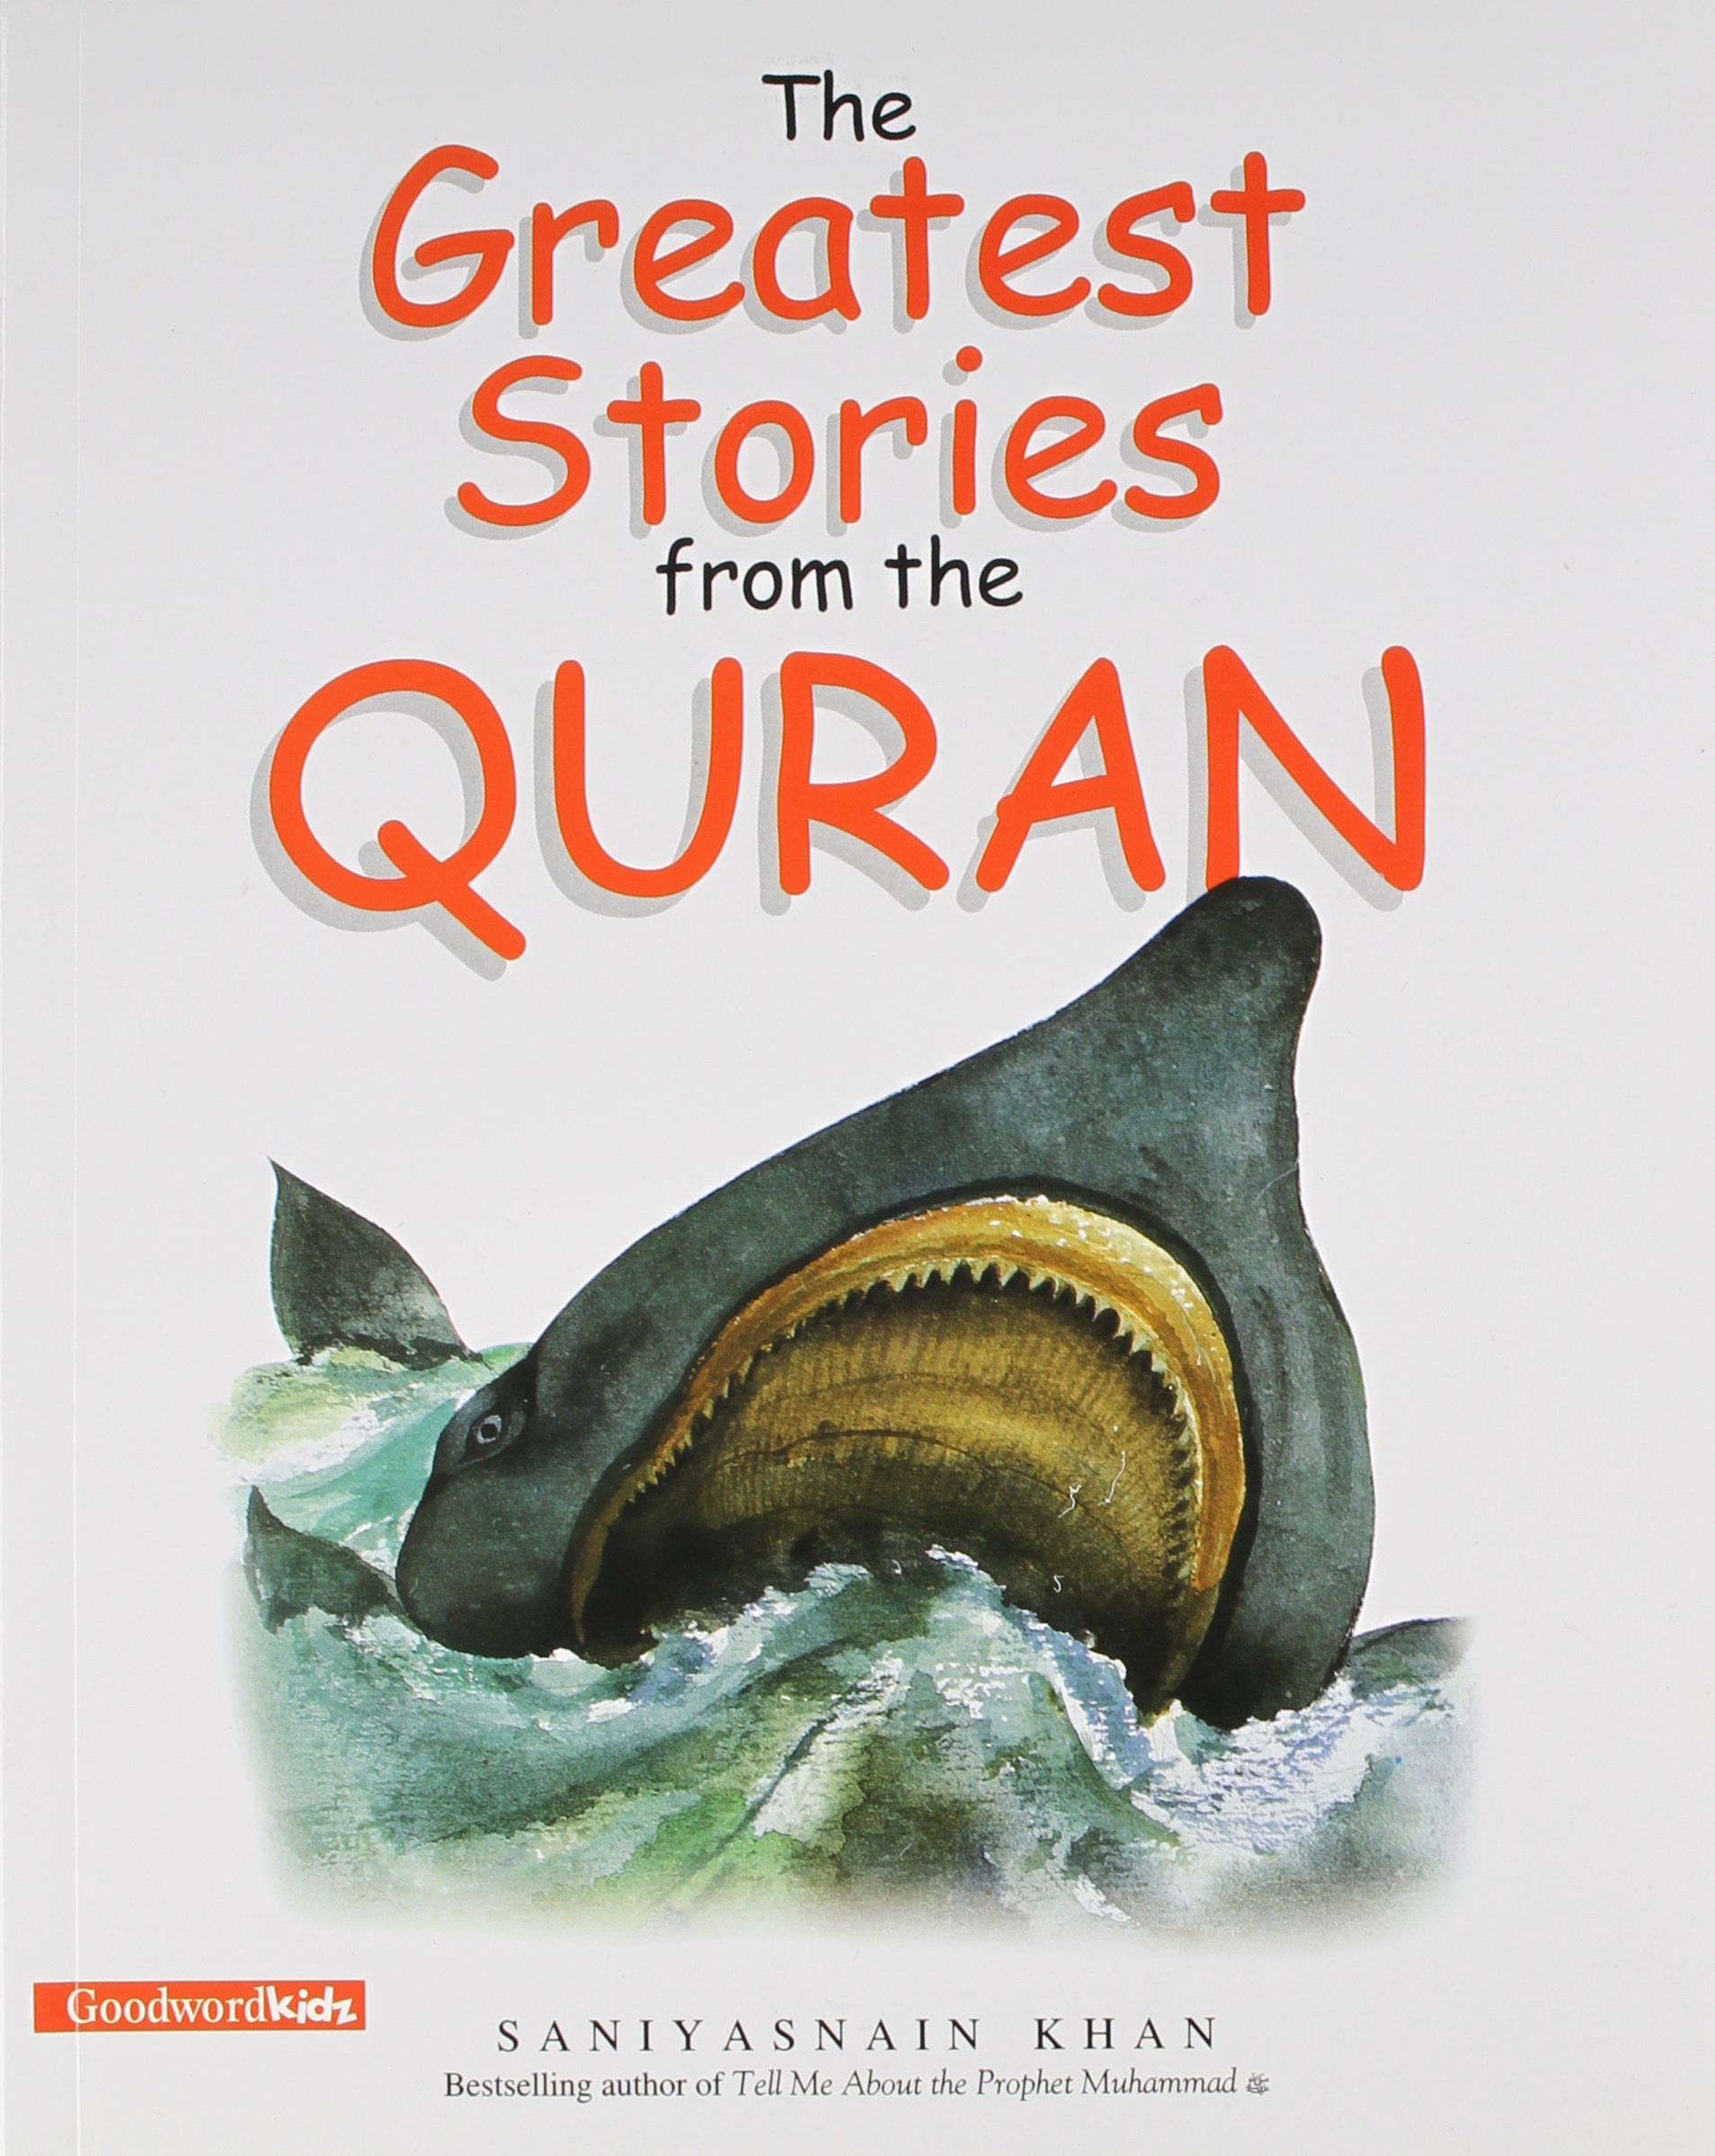 The Greatest Stories from the Quran by Saniyasnain Khan - Tarbiyah Books  Plus